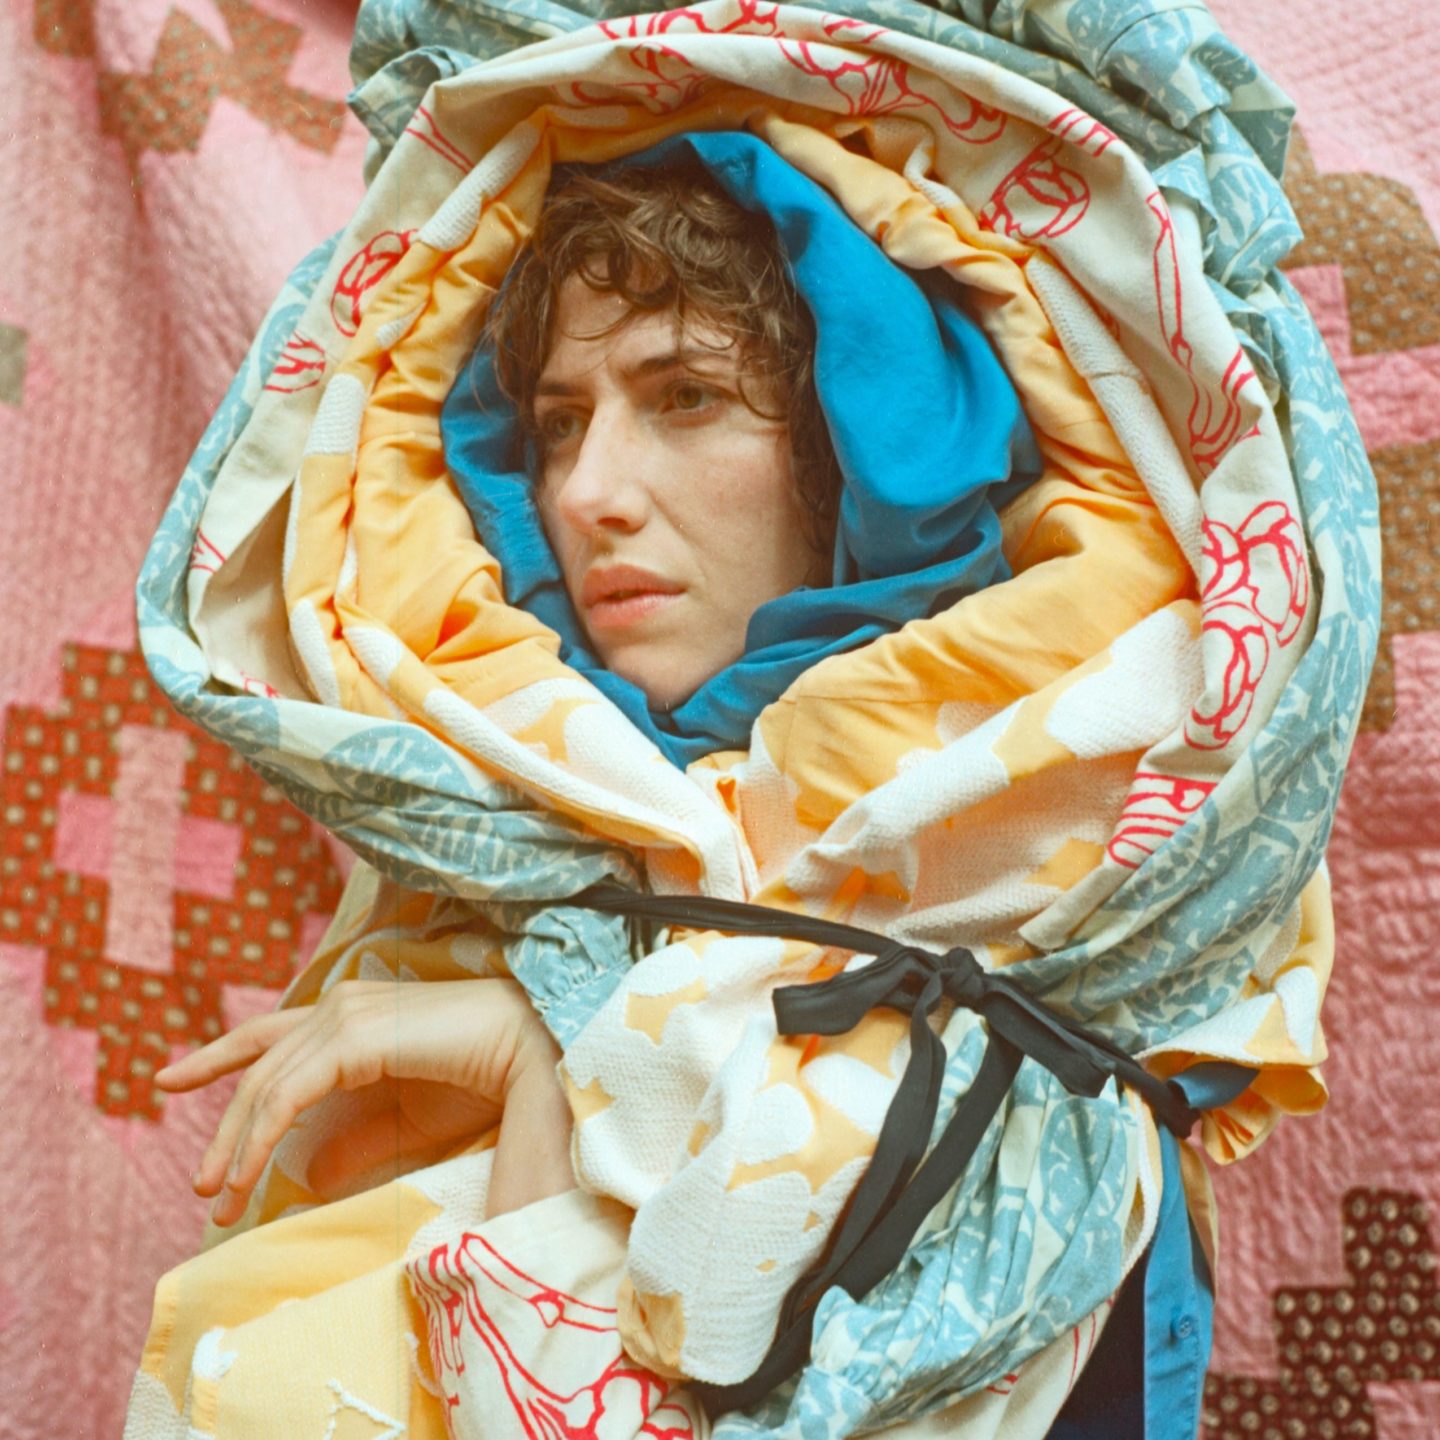 Person with brown hair wrapped in colored quilt blanket